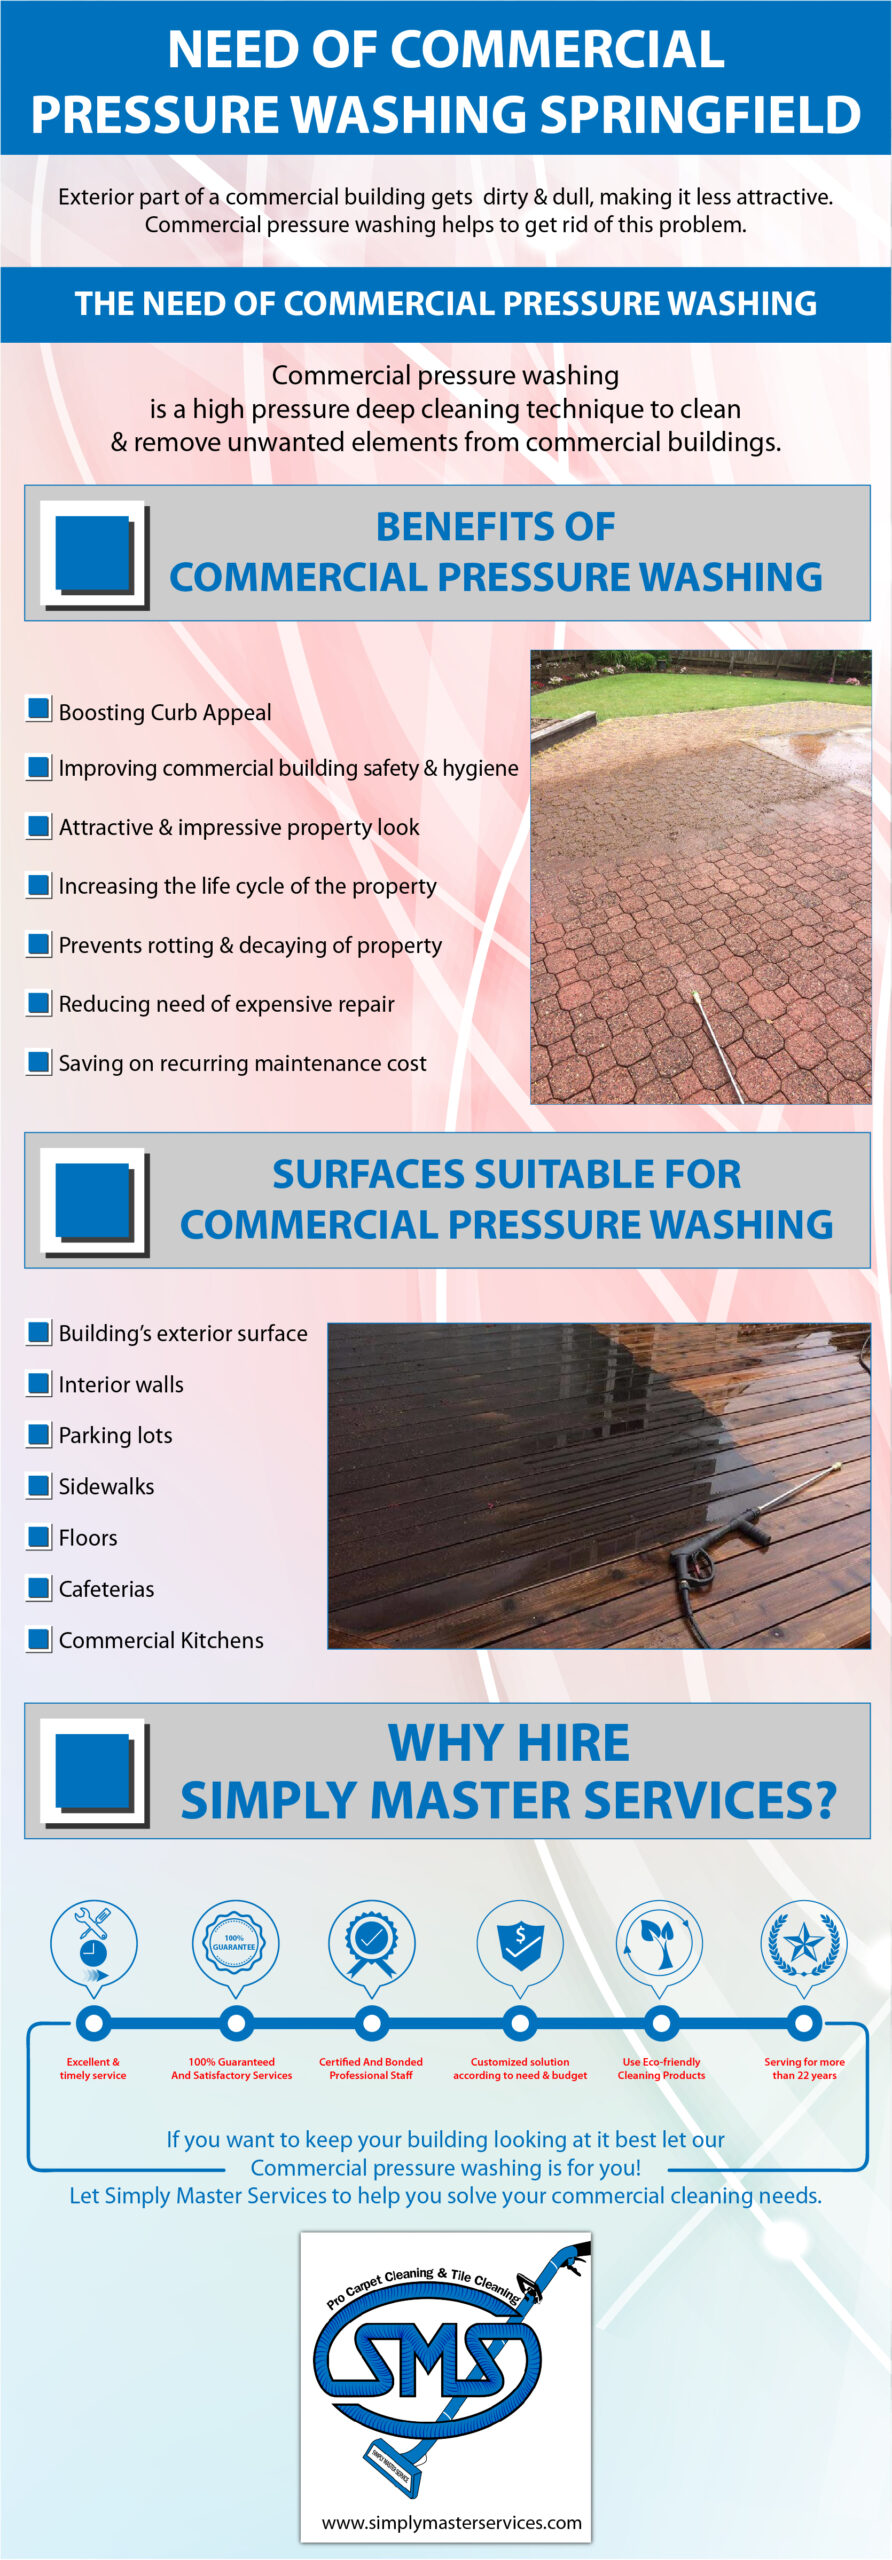 The Need Of Commercial Pressure Washing Springfield